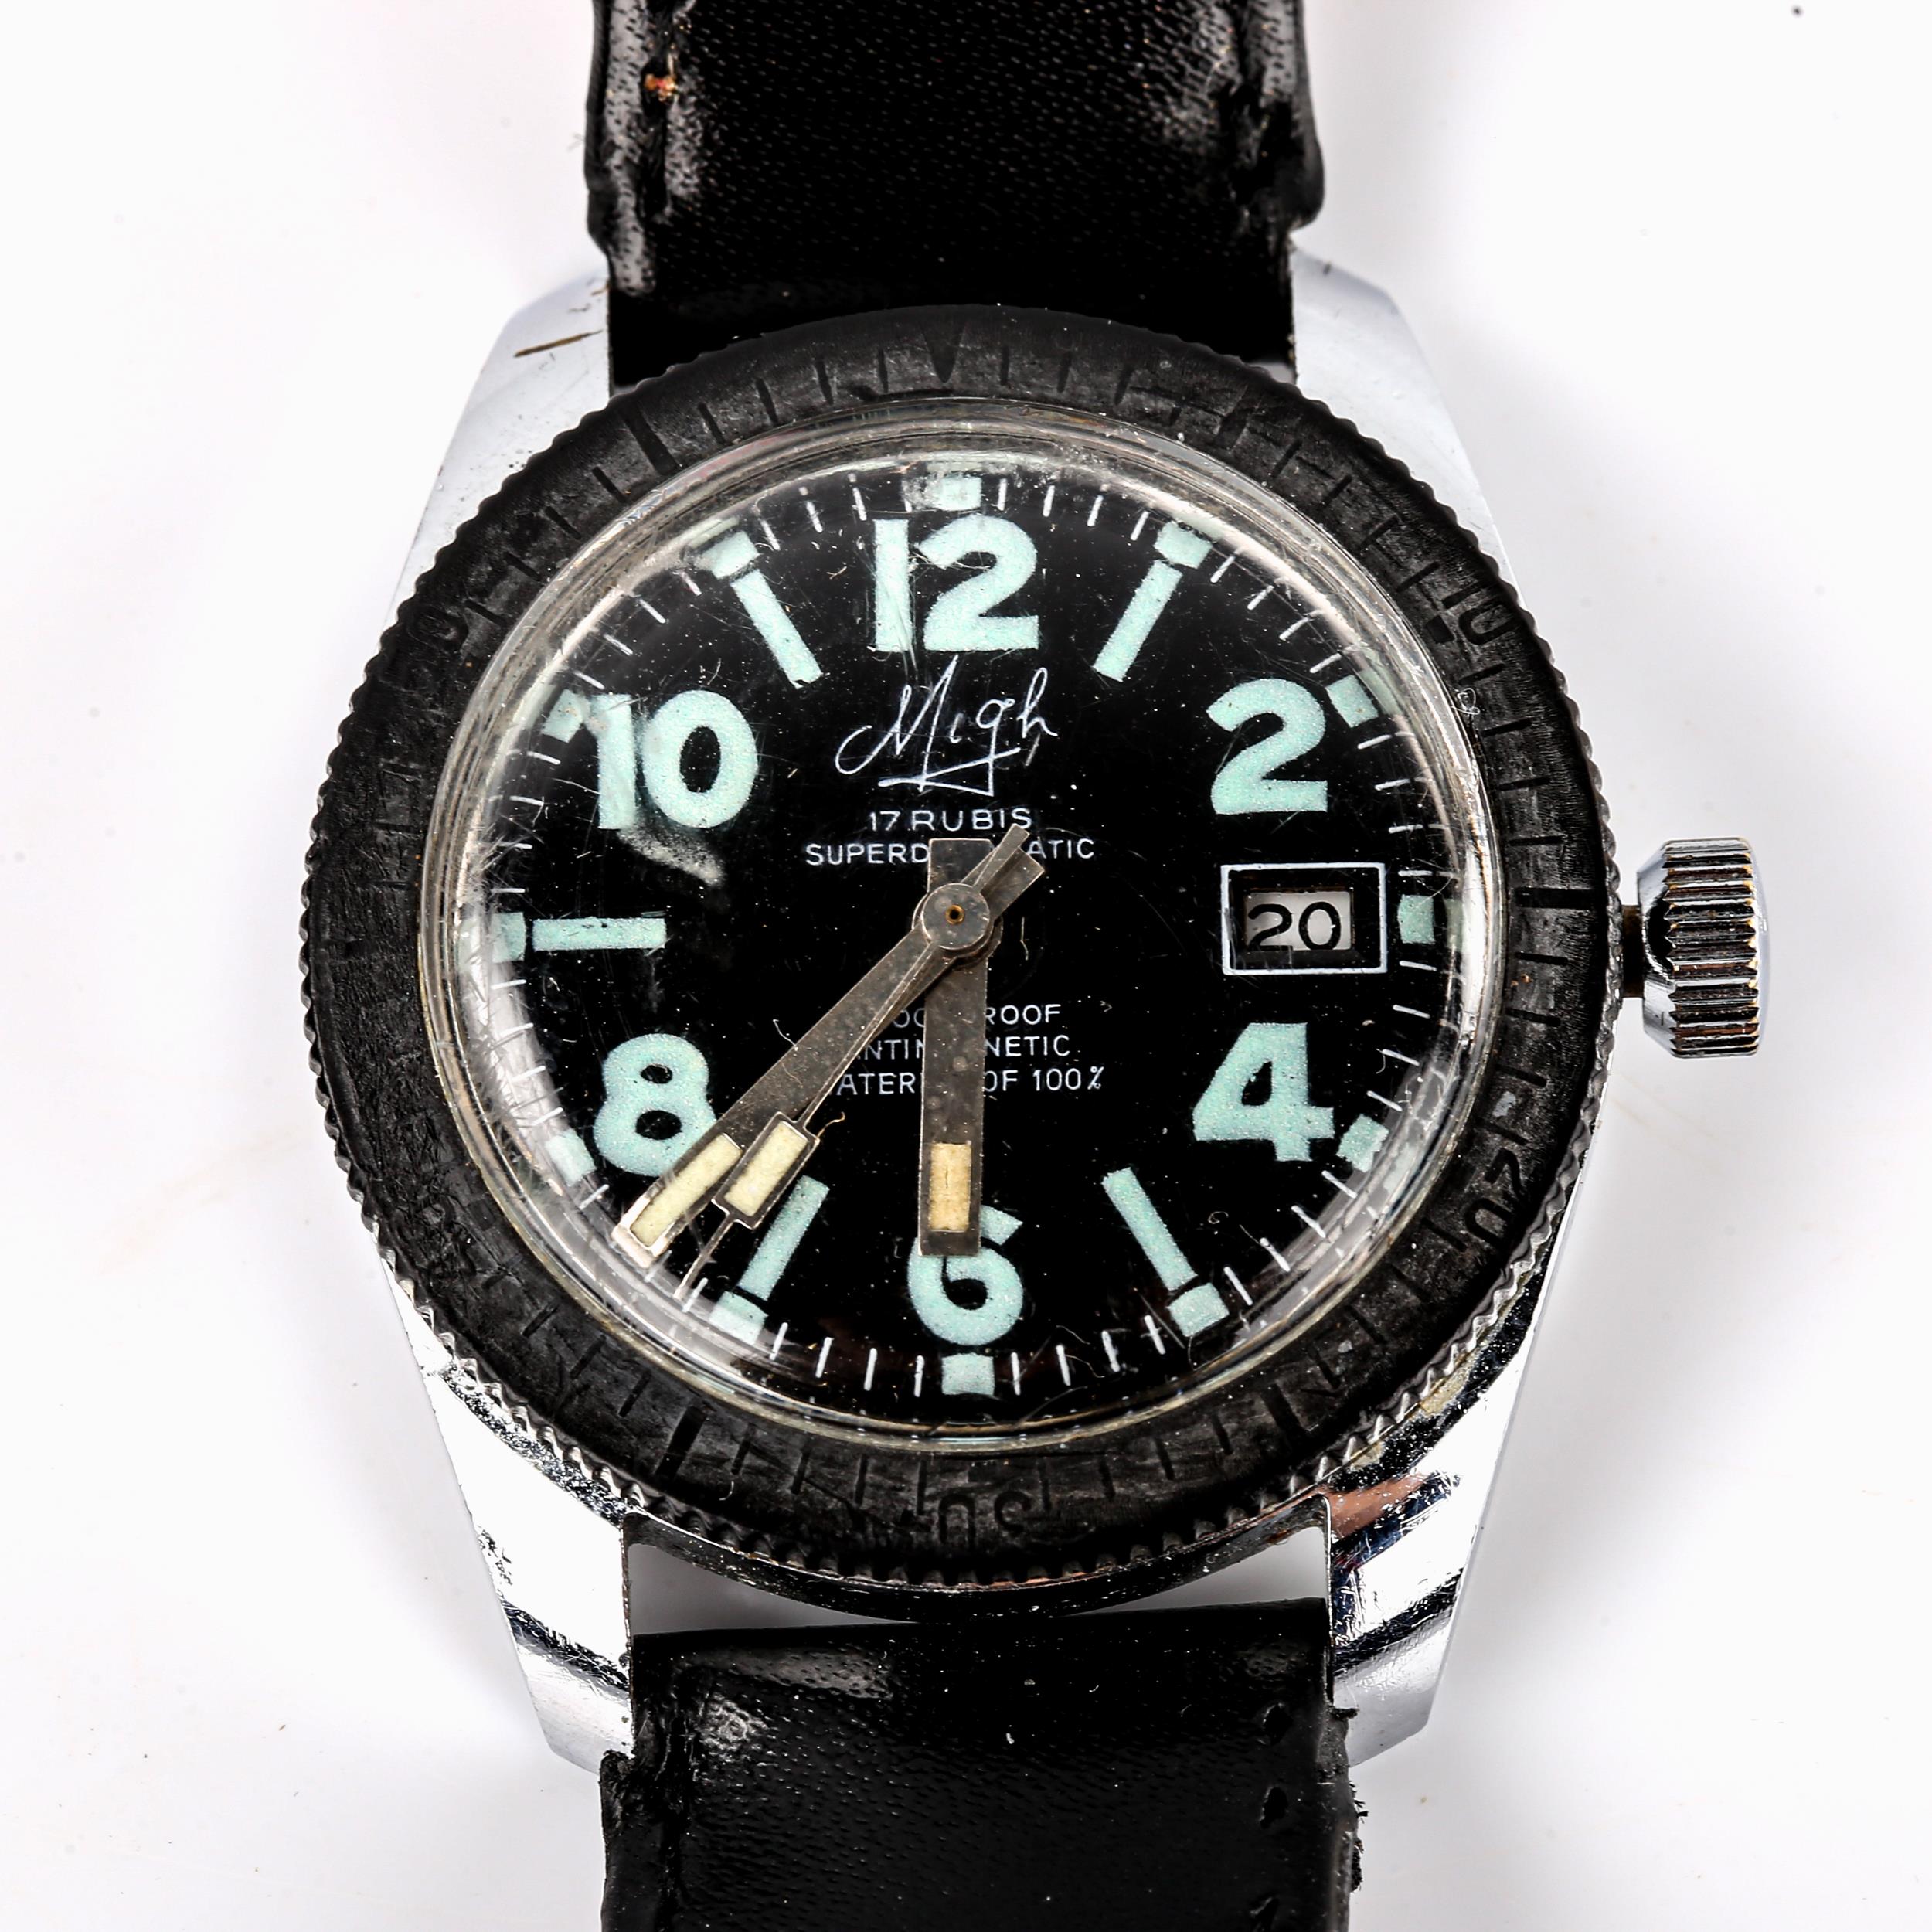 MIGH - a Vintage stainless steel Superdatomatic Diver's mechanical wristwatch, black dial with